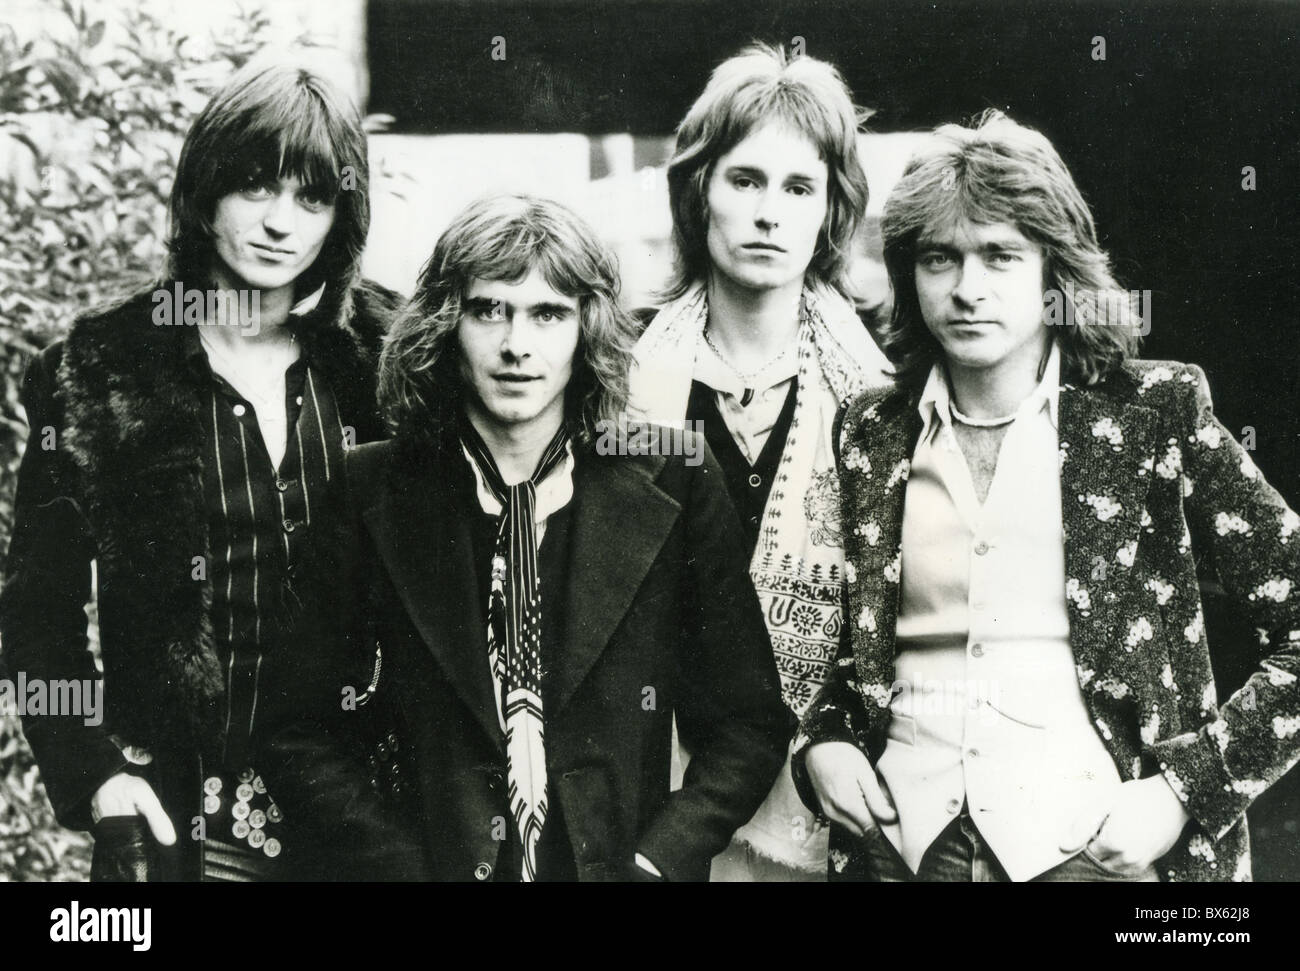 THE BABYS Promotional photo of UK pop rock group about 1976. From left: Michael Corby, Wally Stocker, John Waite, Tony Brock. Stock Photo